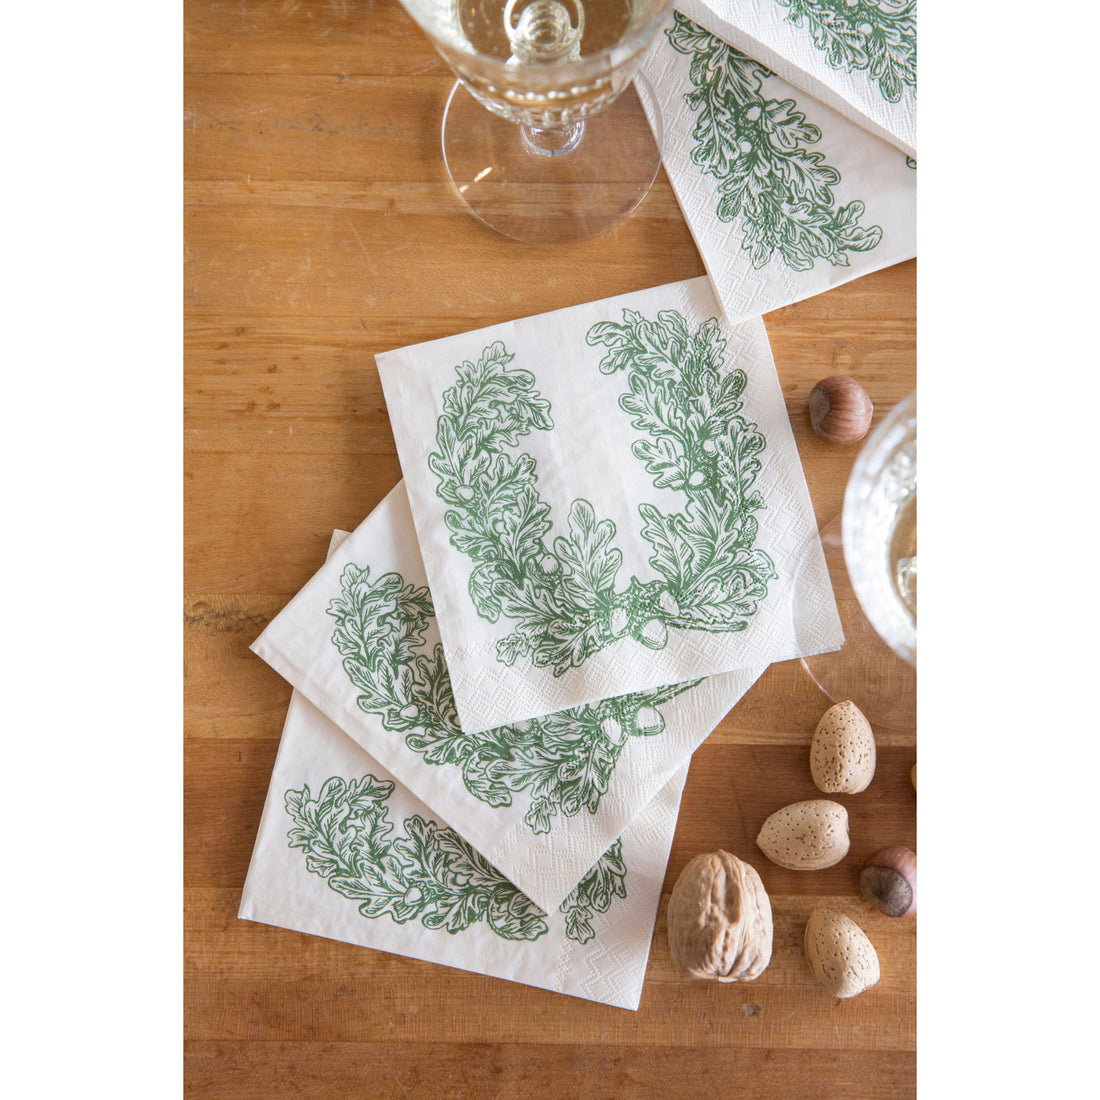 Several Oak Leaves Cocktail Napkins spread over a rustic table setting.